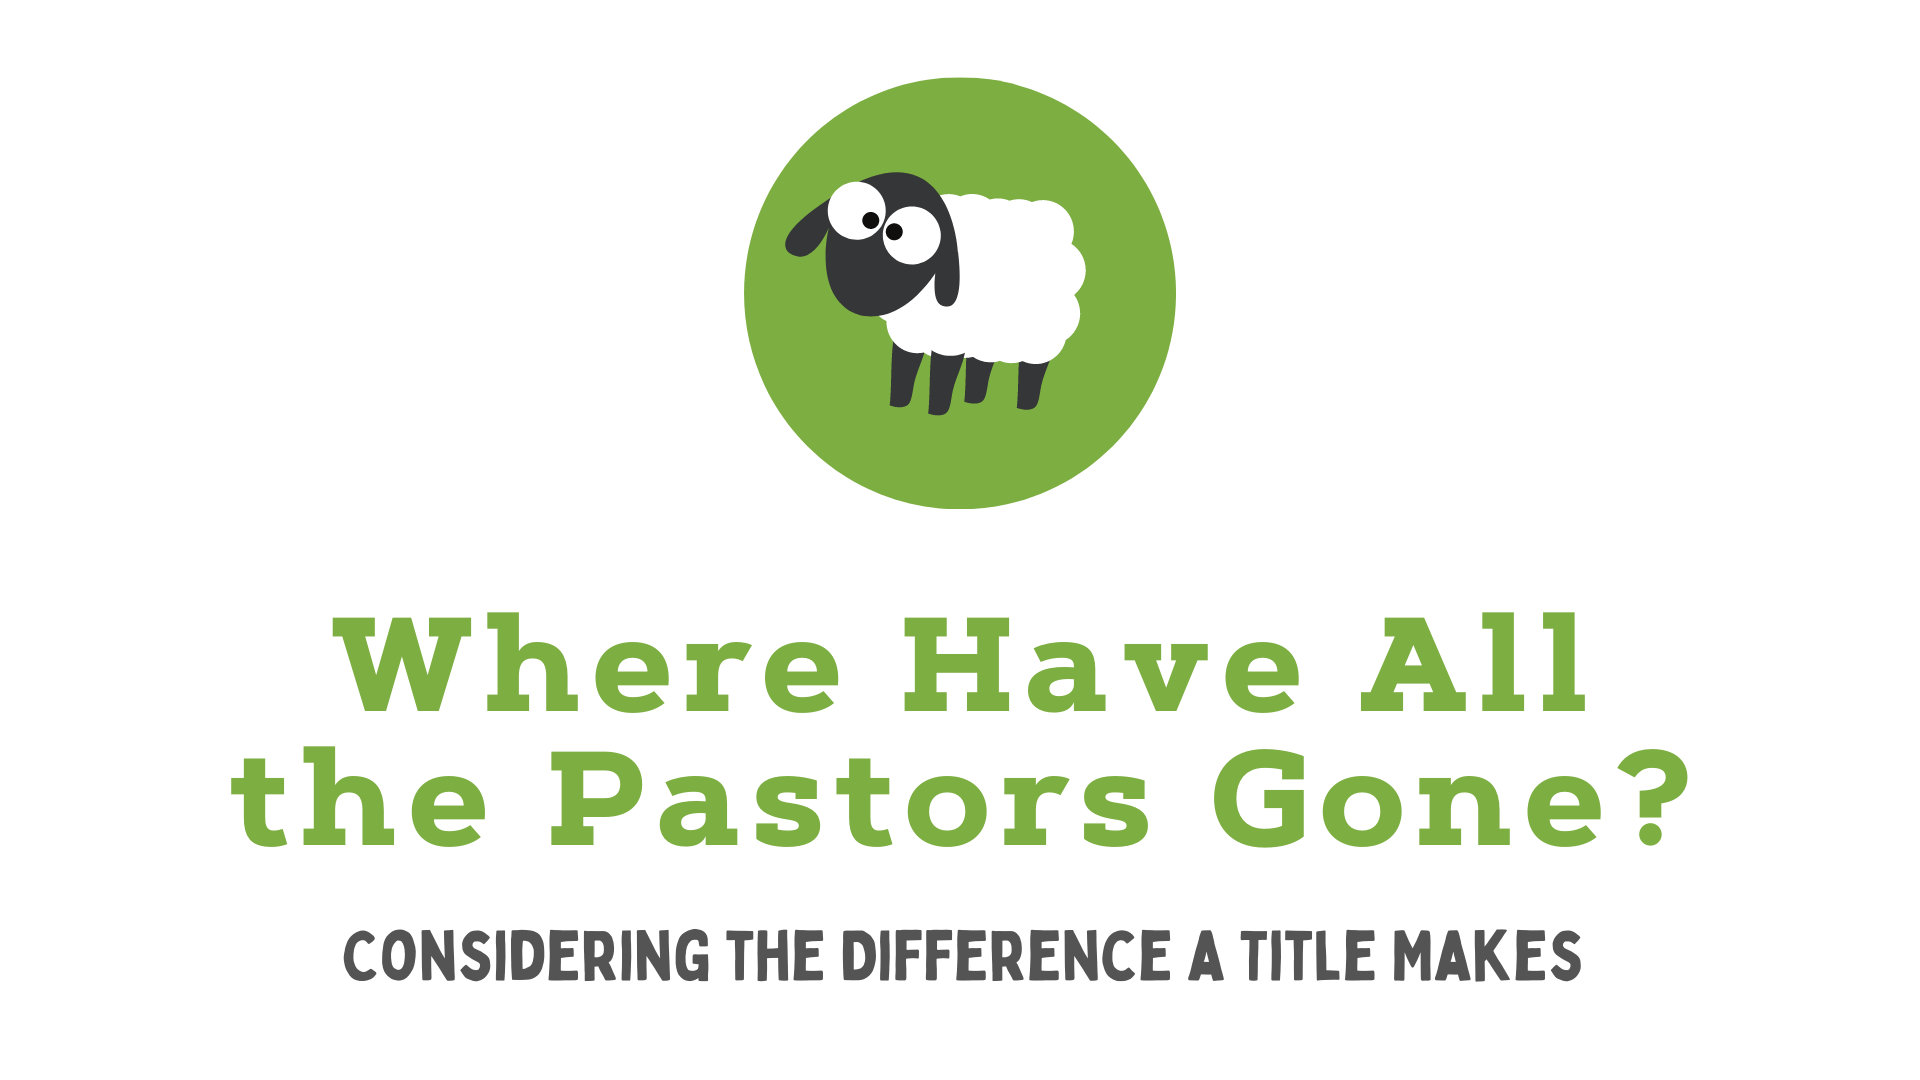 Where Have All the Pastors Gone? Considering the Difference a Title Makes